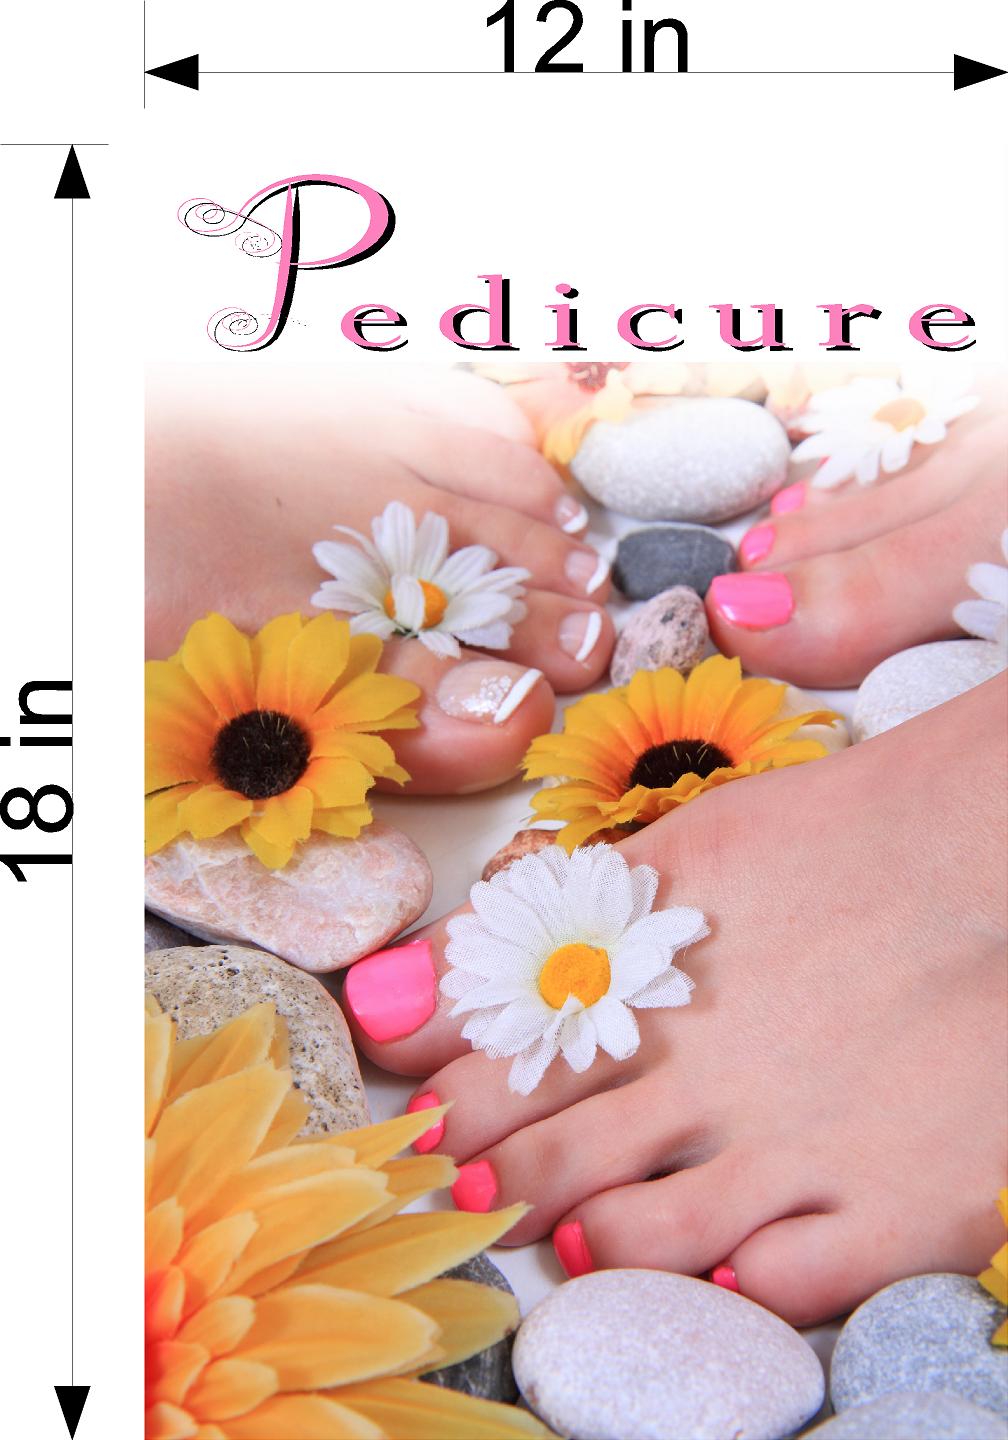 Pedicure 24 Wallpaper Fabric Poster Decal with Adhesive Backing Wall Sticker Decor Indoors Interior Sign Vertical